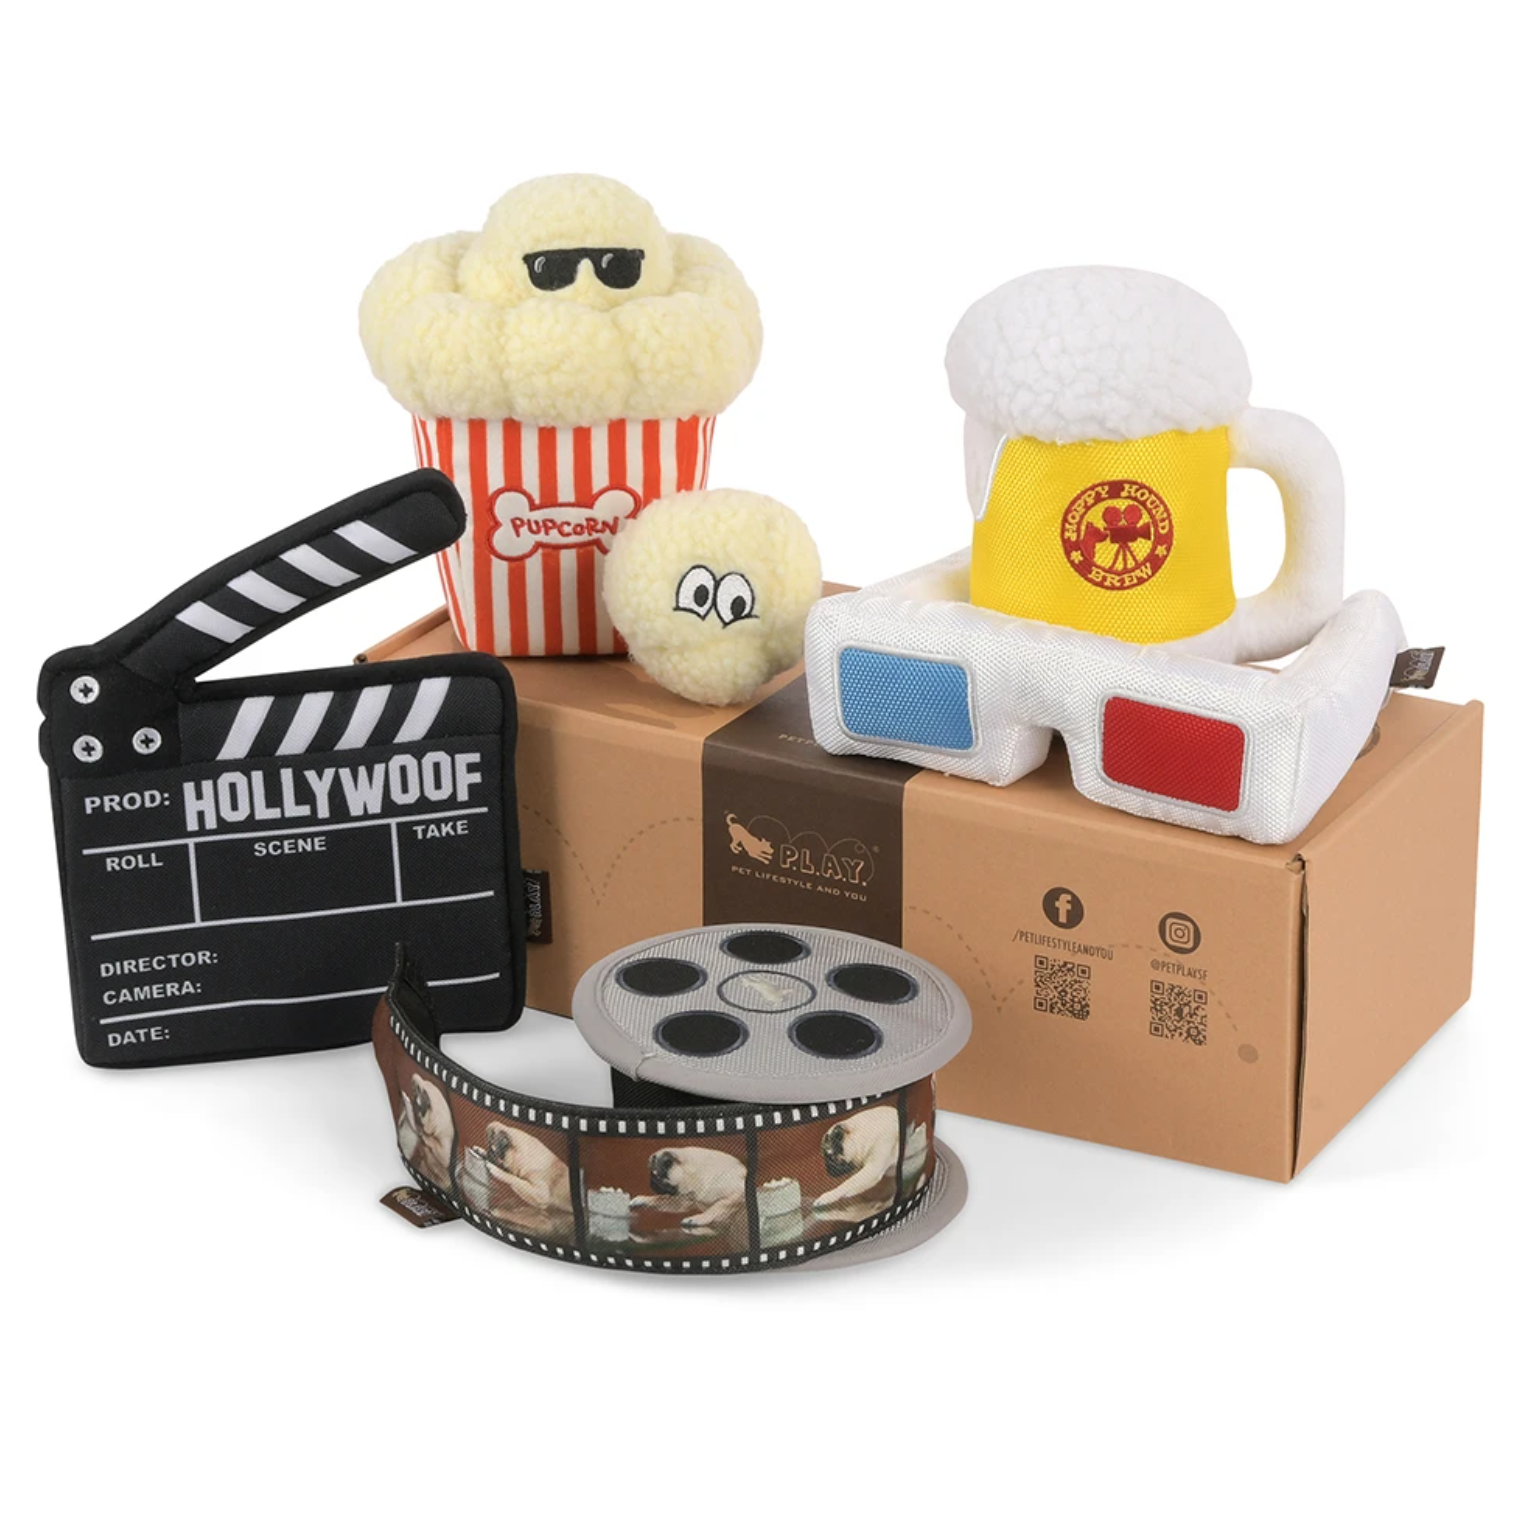 Hollywoof Cinema Collection play P.L.A.Y. hollywood knuffels hond puppy